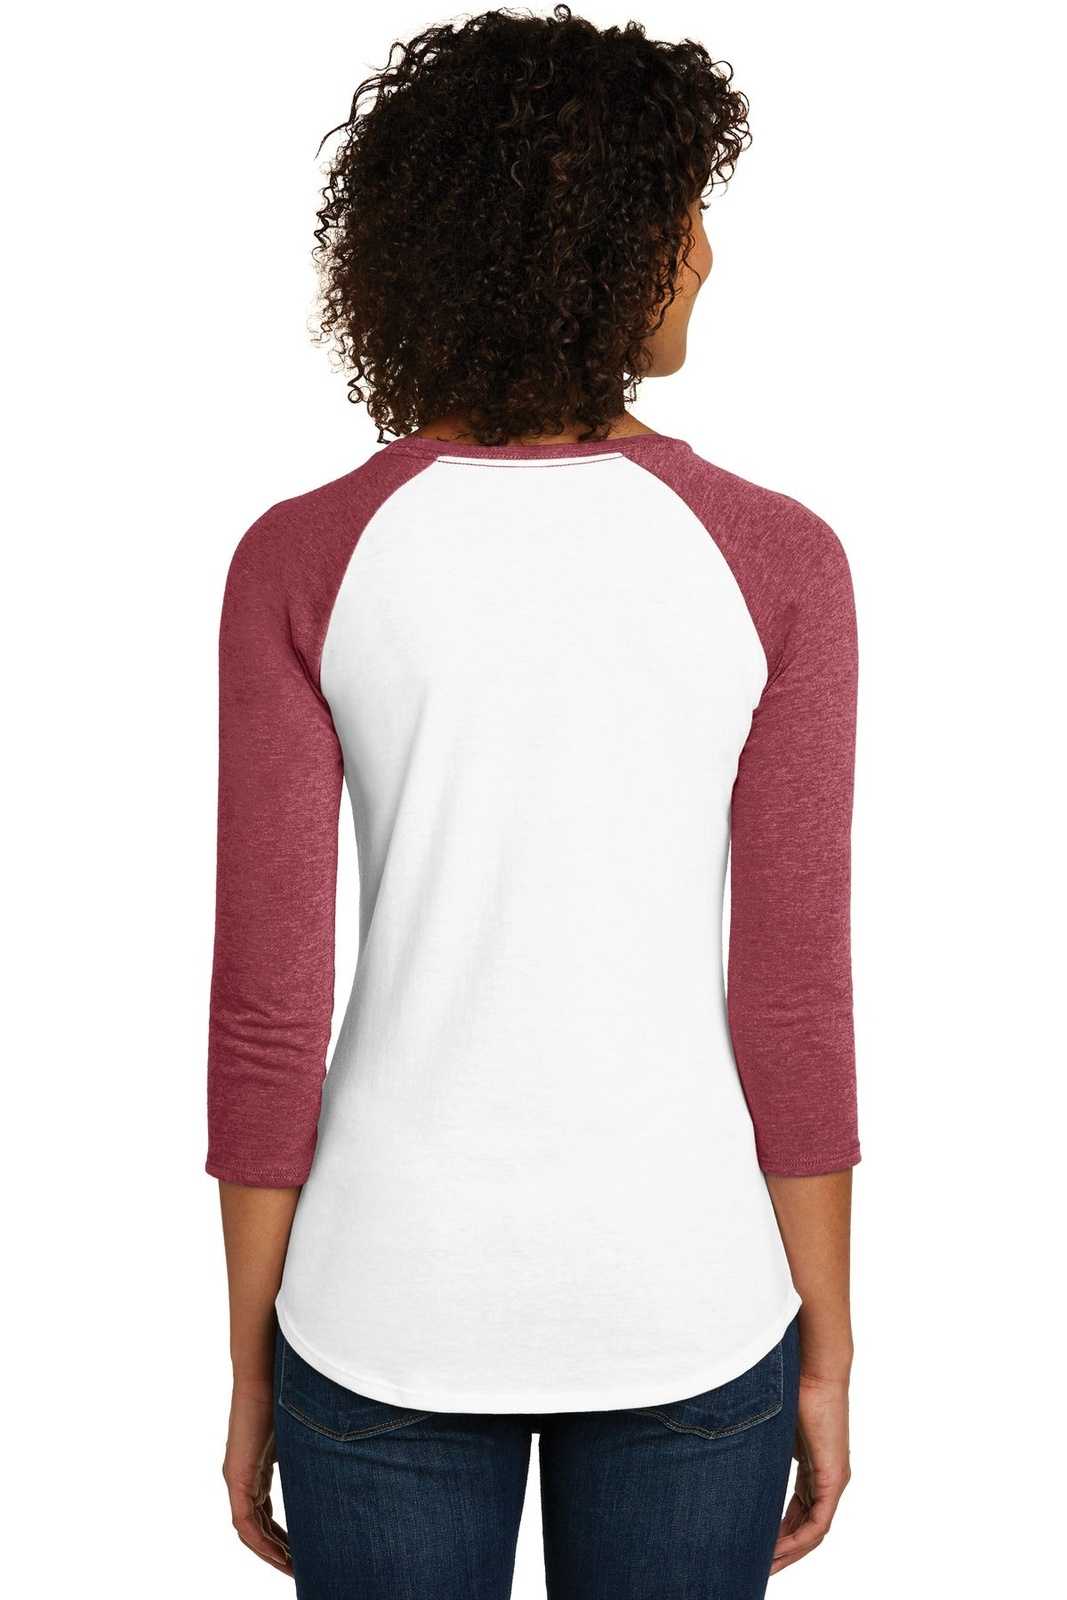 District DT6211 Women's Fitted Very Important Tee 3/4-Sleeve Raglan - Heathered Red White - HIT a Double - 1